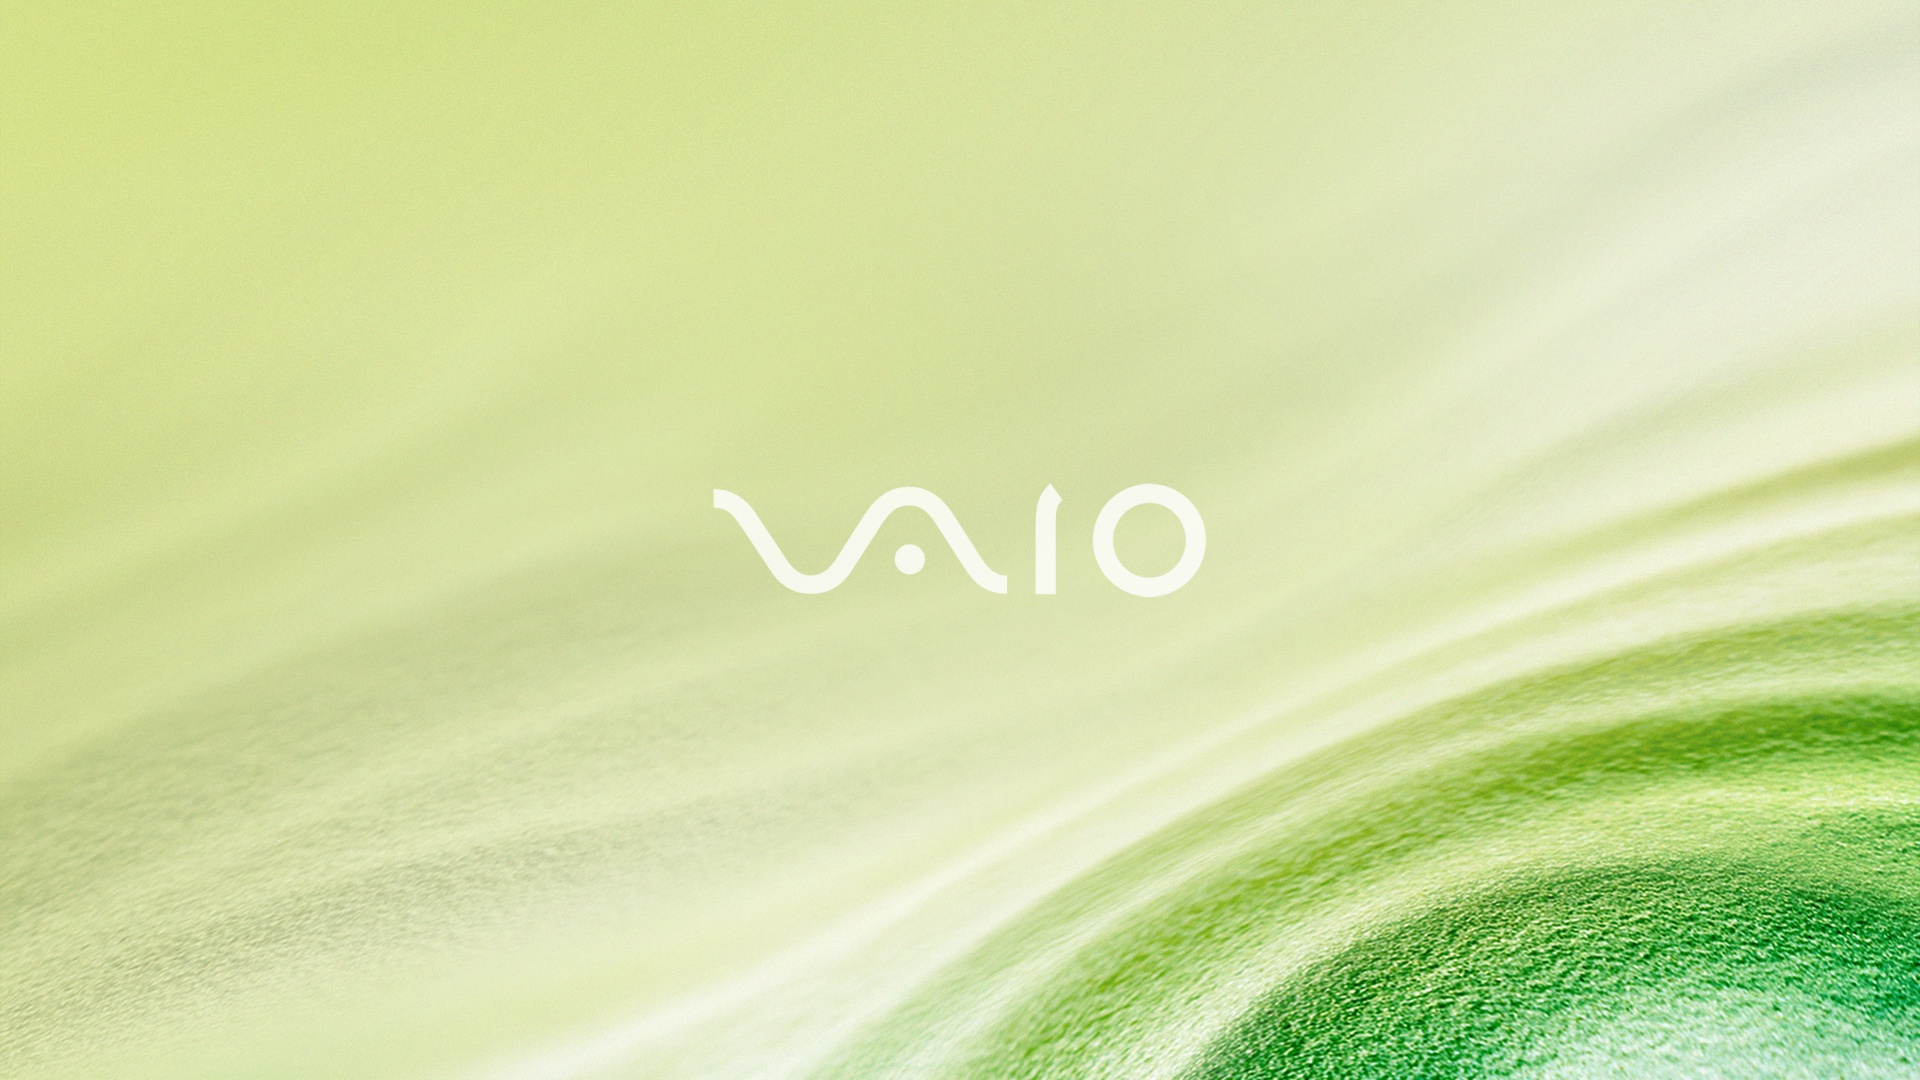 Free Download 19x1080 Vaio Green Desktop Pc And Mac Wallpaper 19x1080 For Your Desktop Mobile Tablet Explore 50 Vaio Wallpaper 19x1080 Sony Wallpapers 19x1080 Sony Vaio Wallpaper Backgrounds